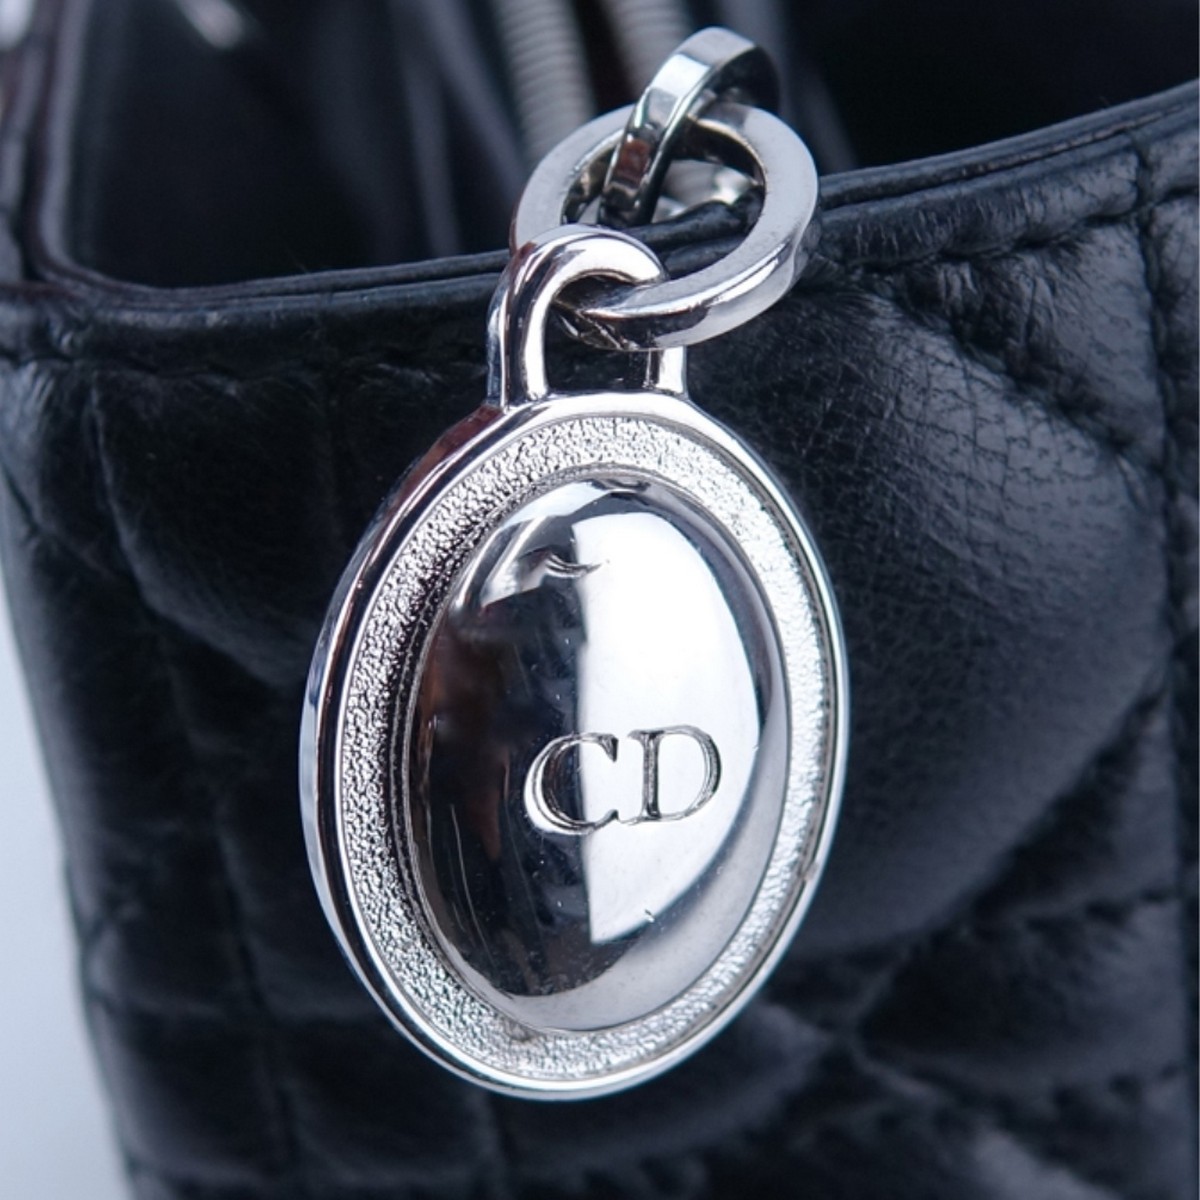 Christian Dior Black Cannage Quilted Leather